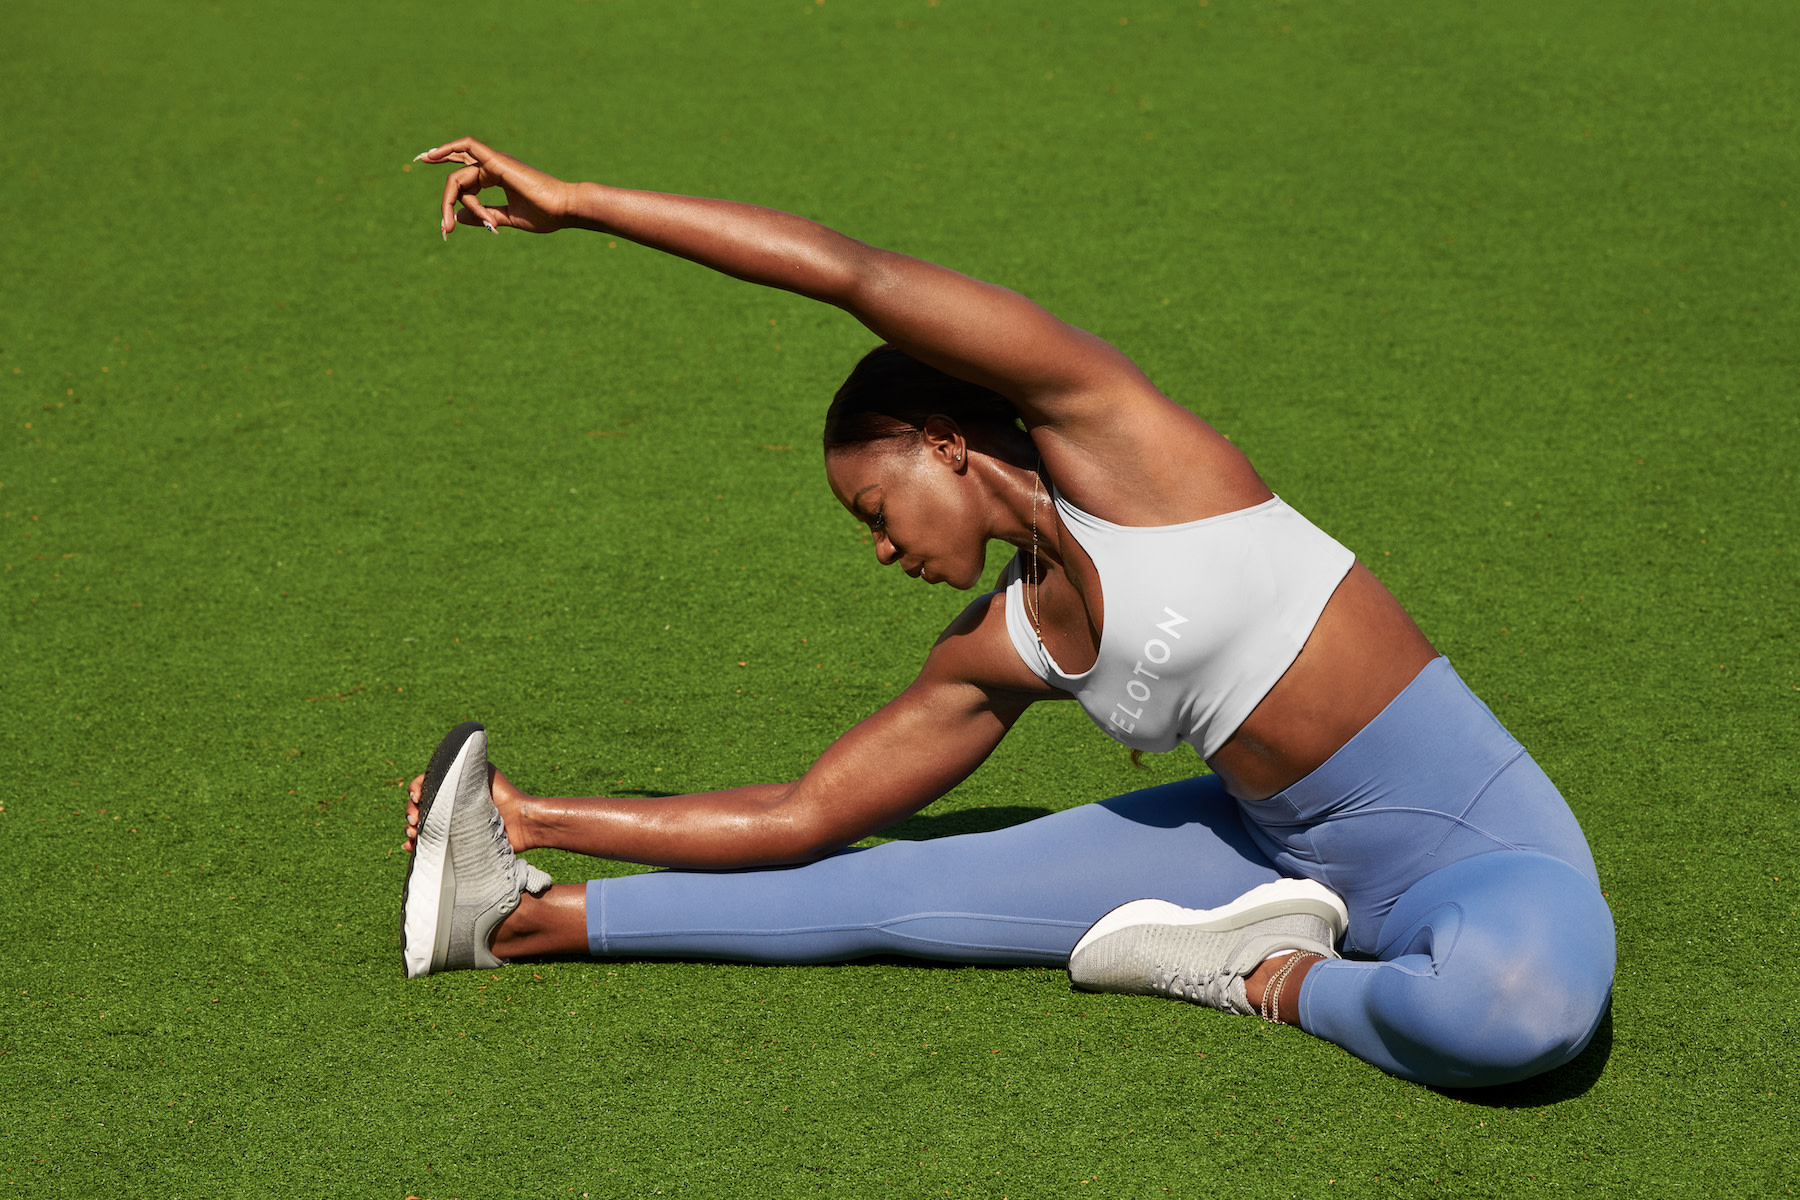 Stretching is more important now than ever